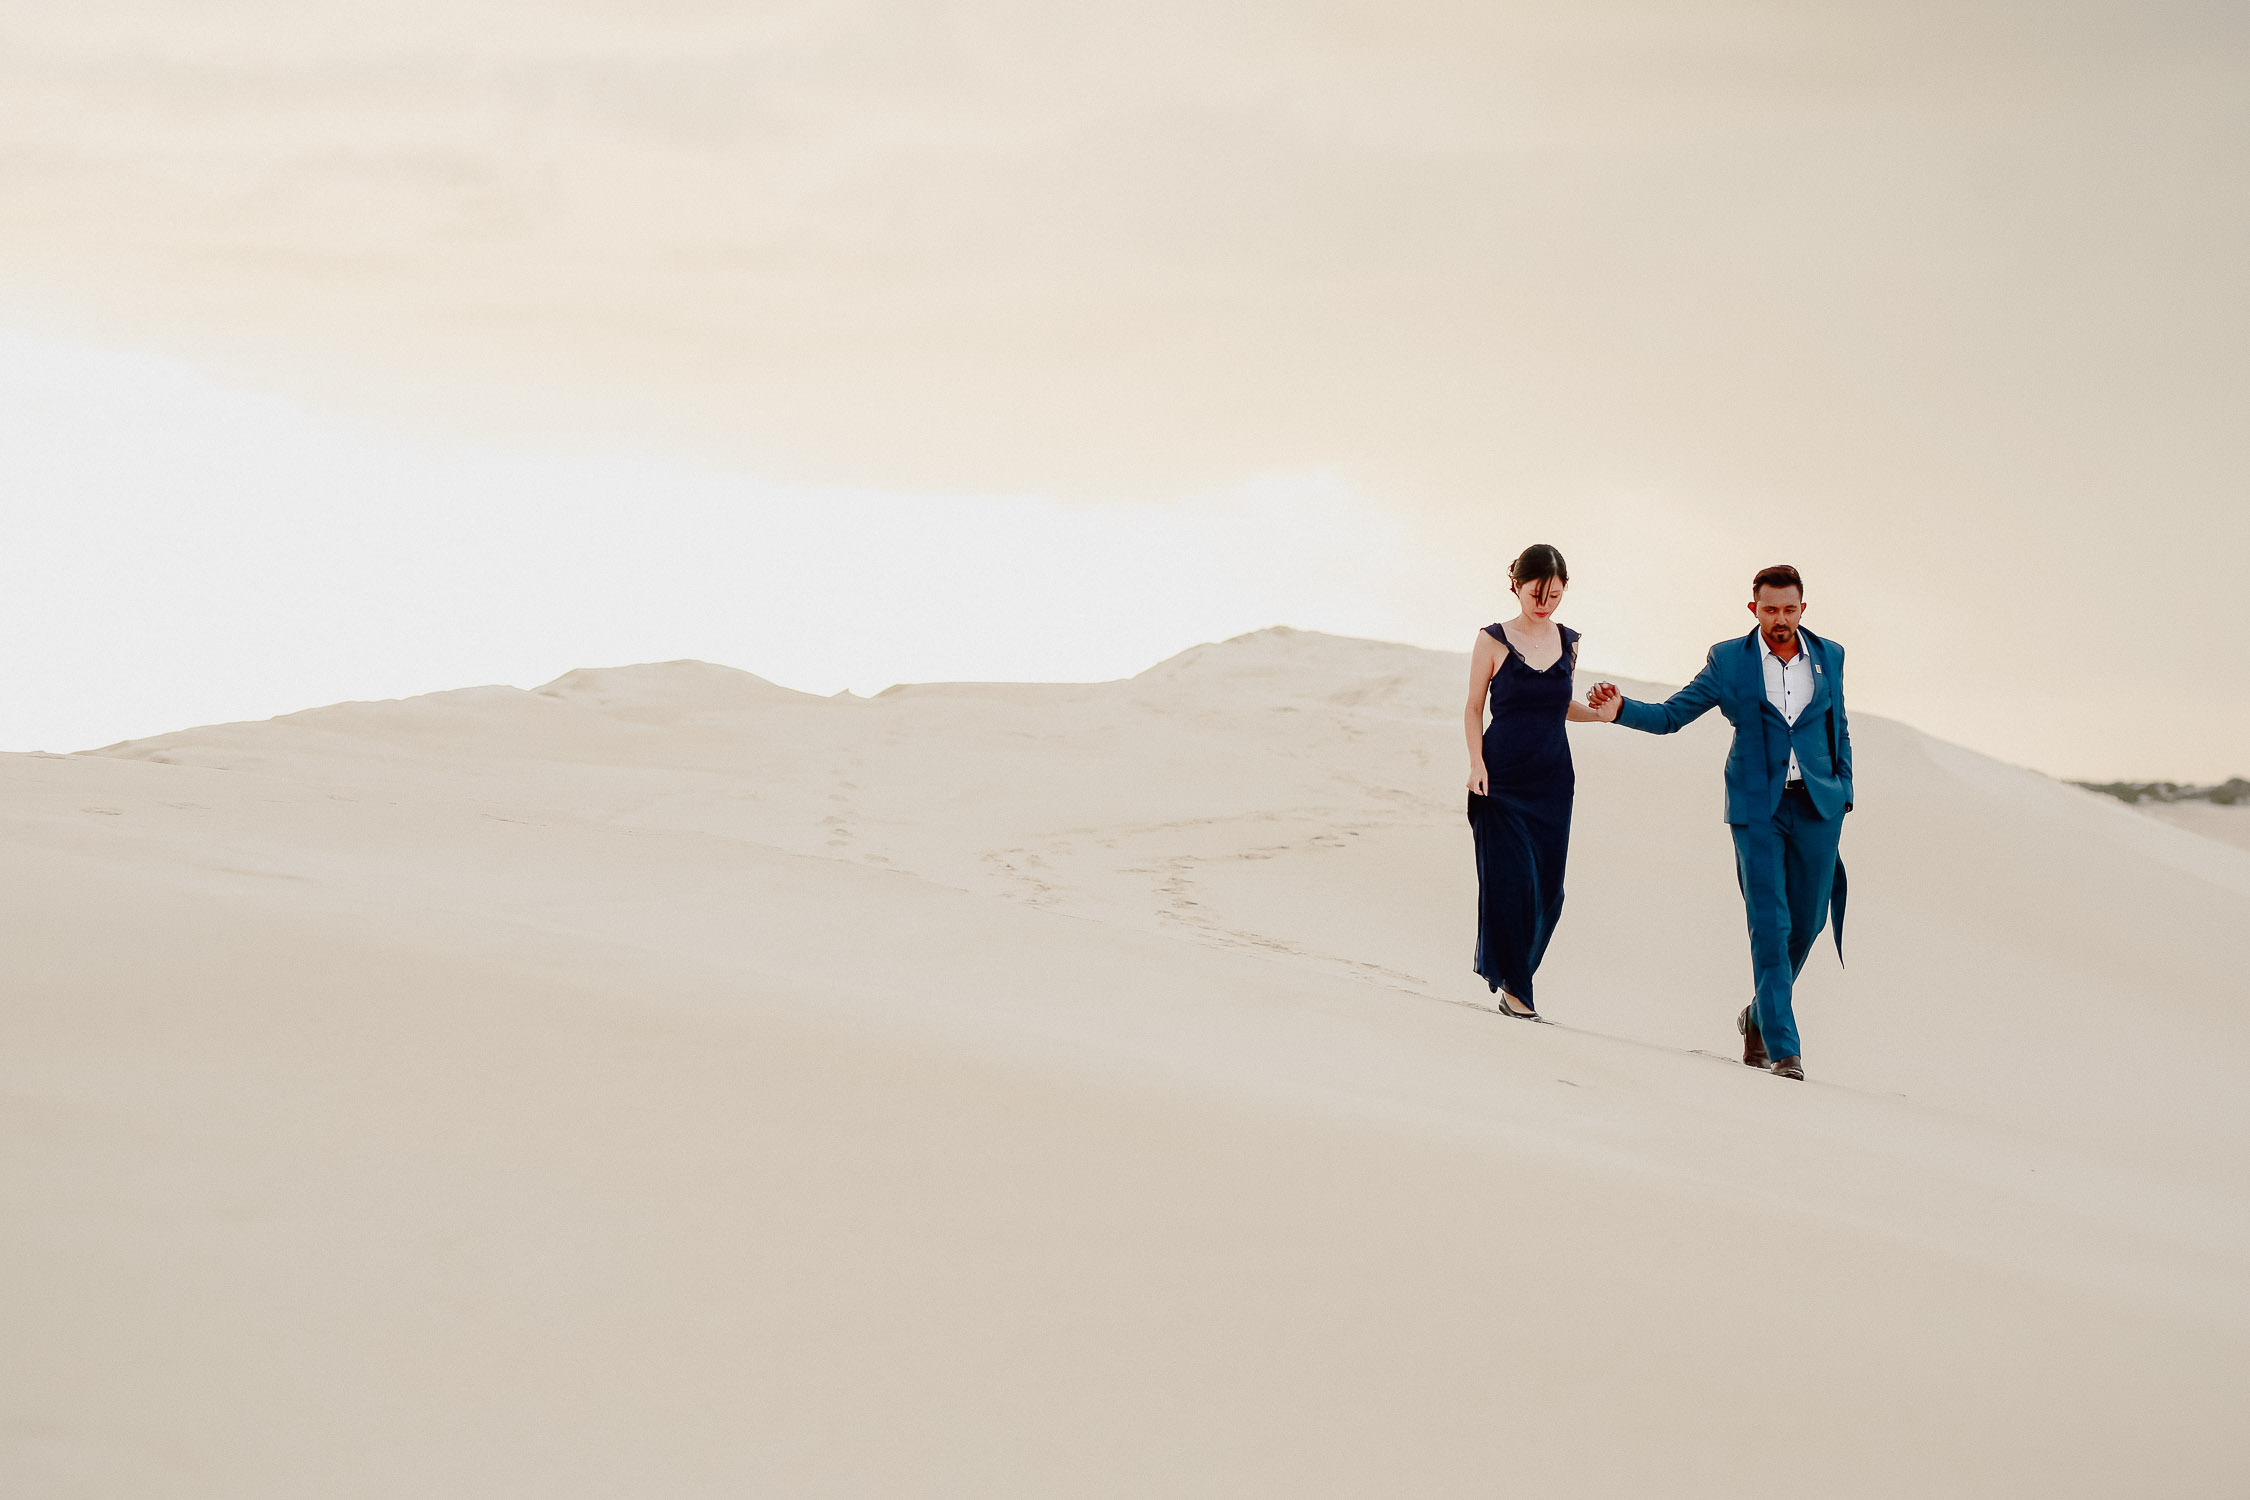 Perth pre-wedding at Lancelin sand dunes, Pinnacles Desert and forest by Naz on OneThreeOneFour 1